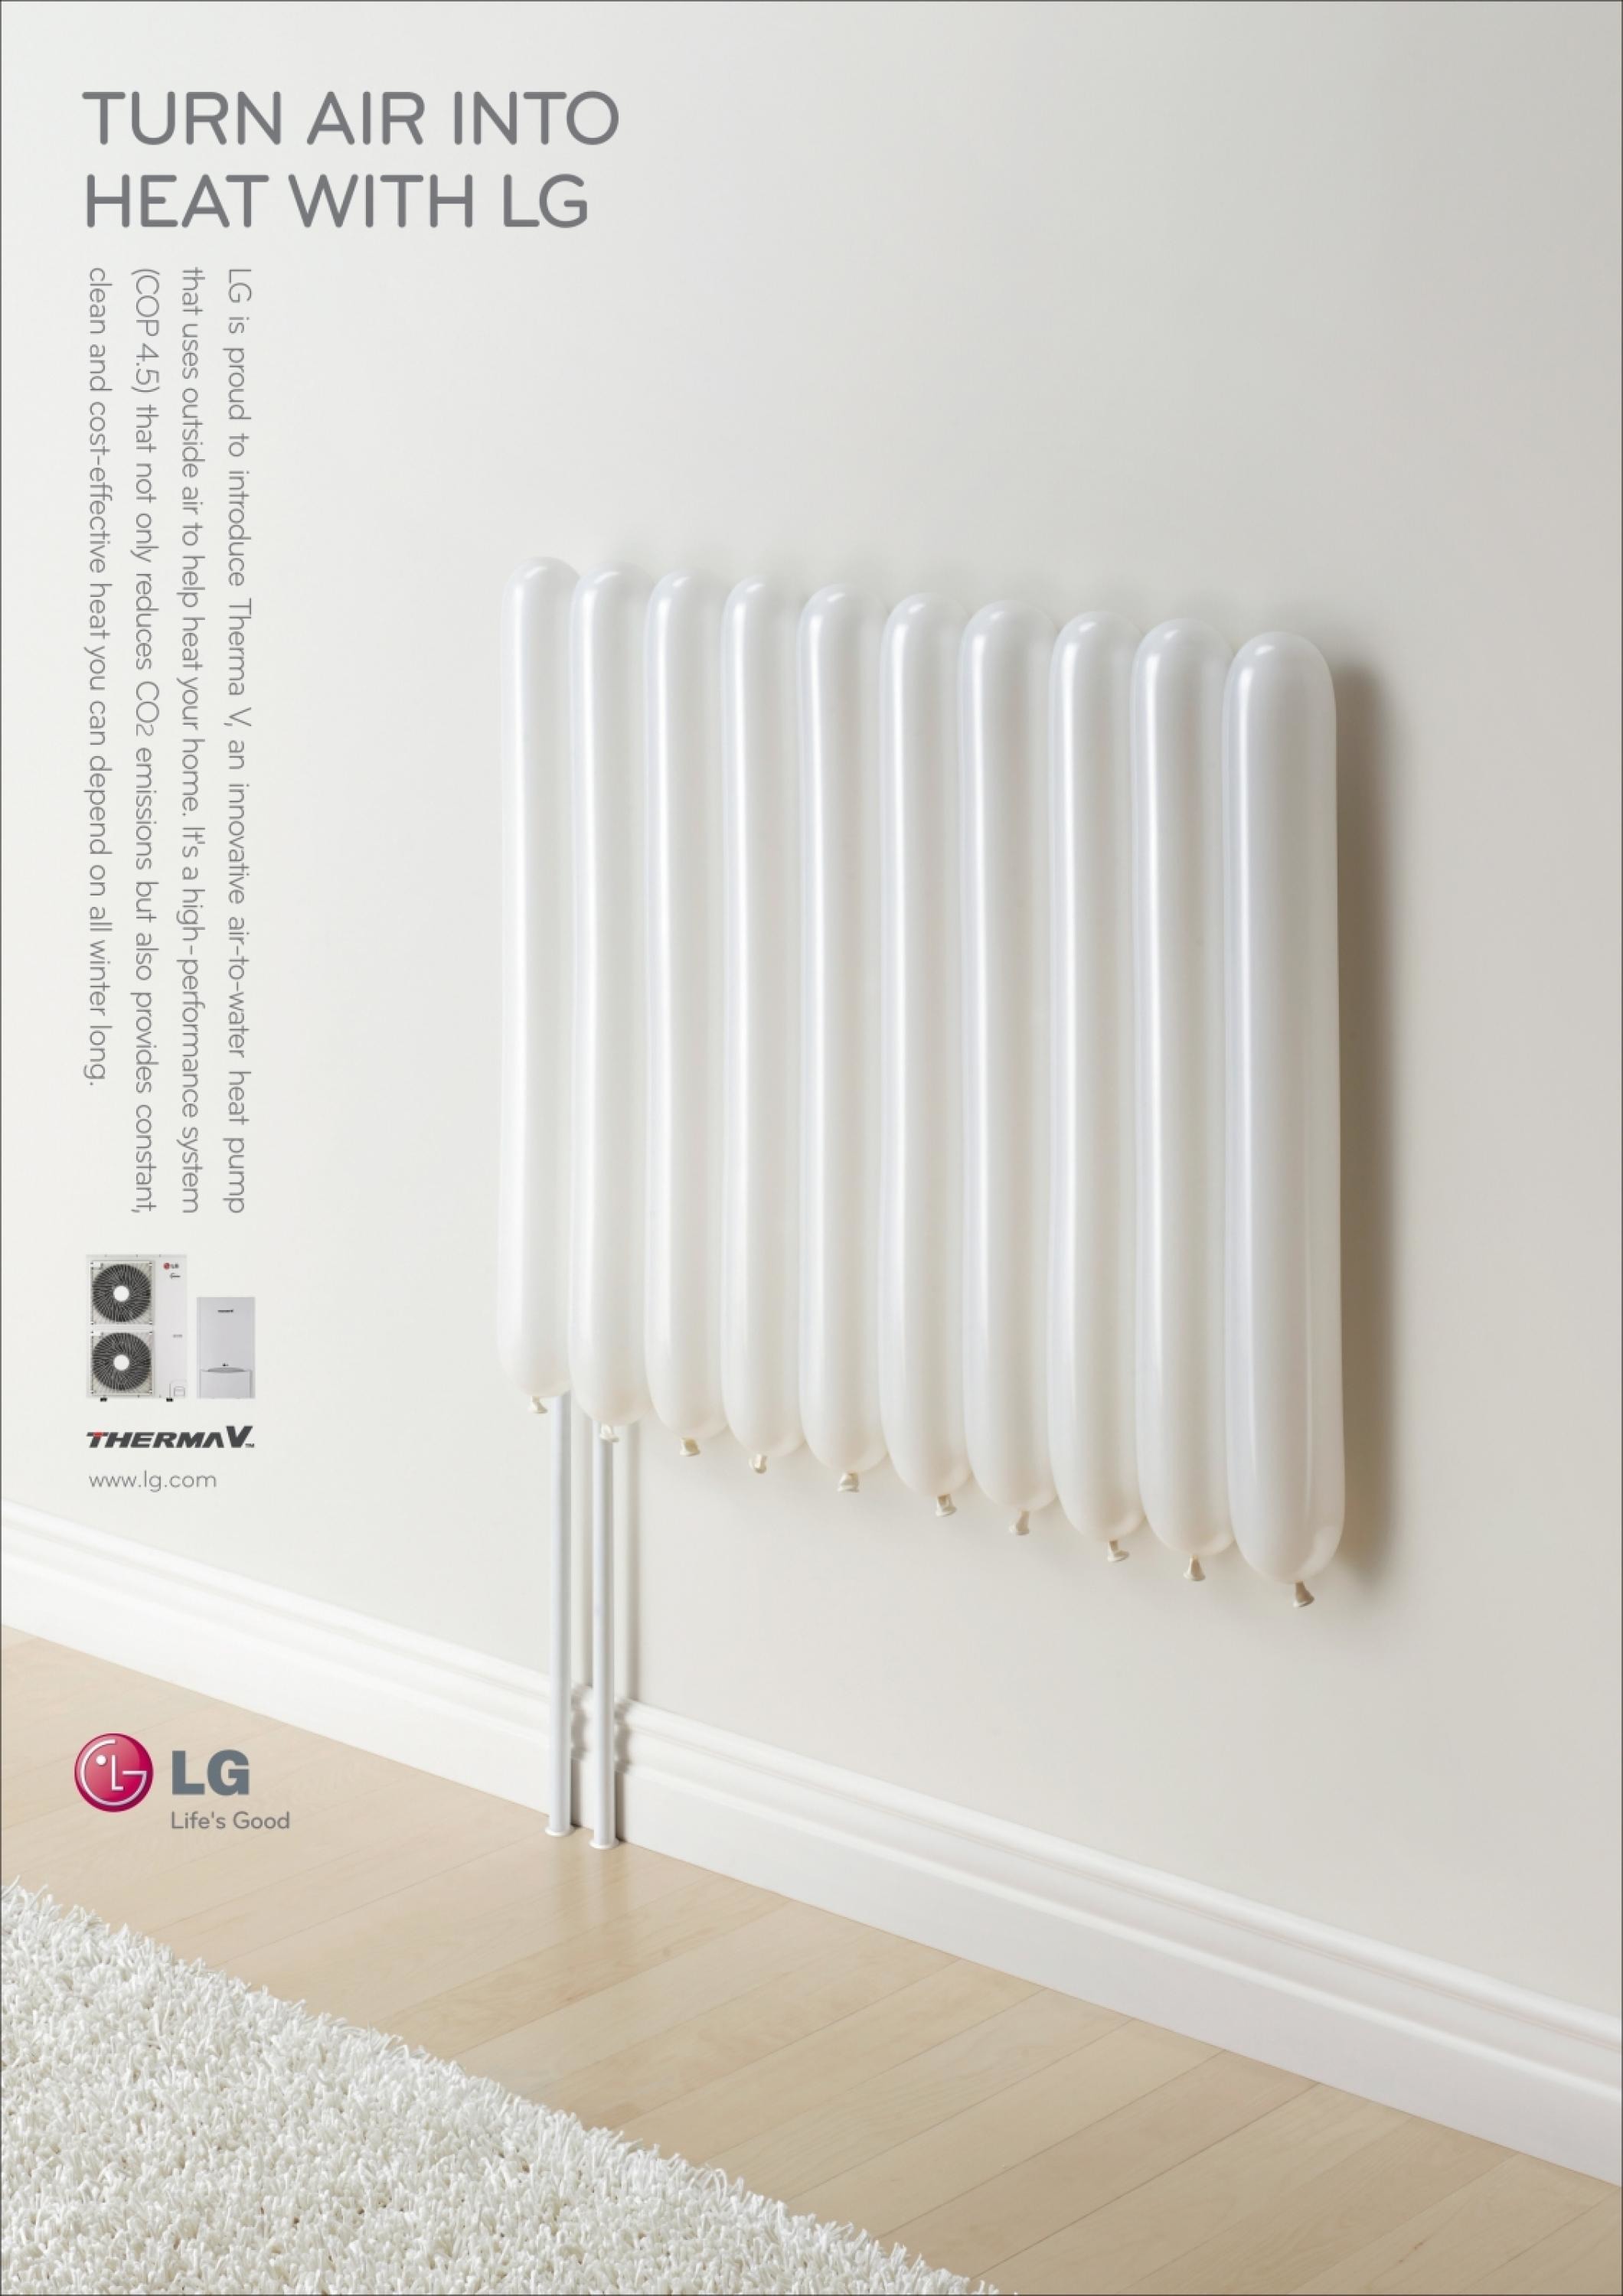 CENTRAL HEATING SYSTEM